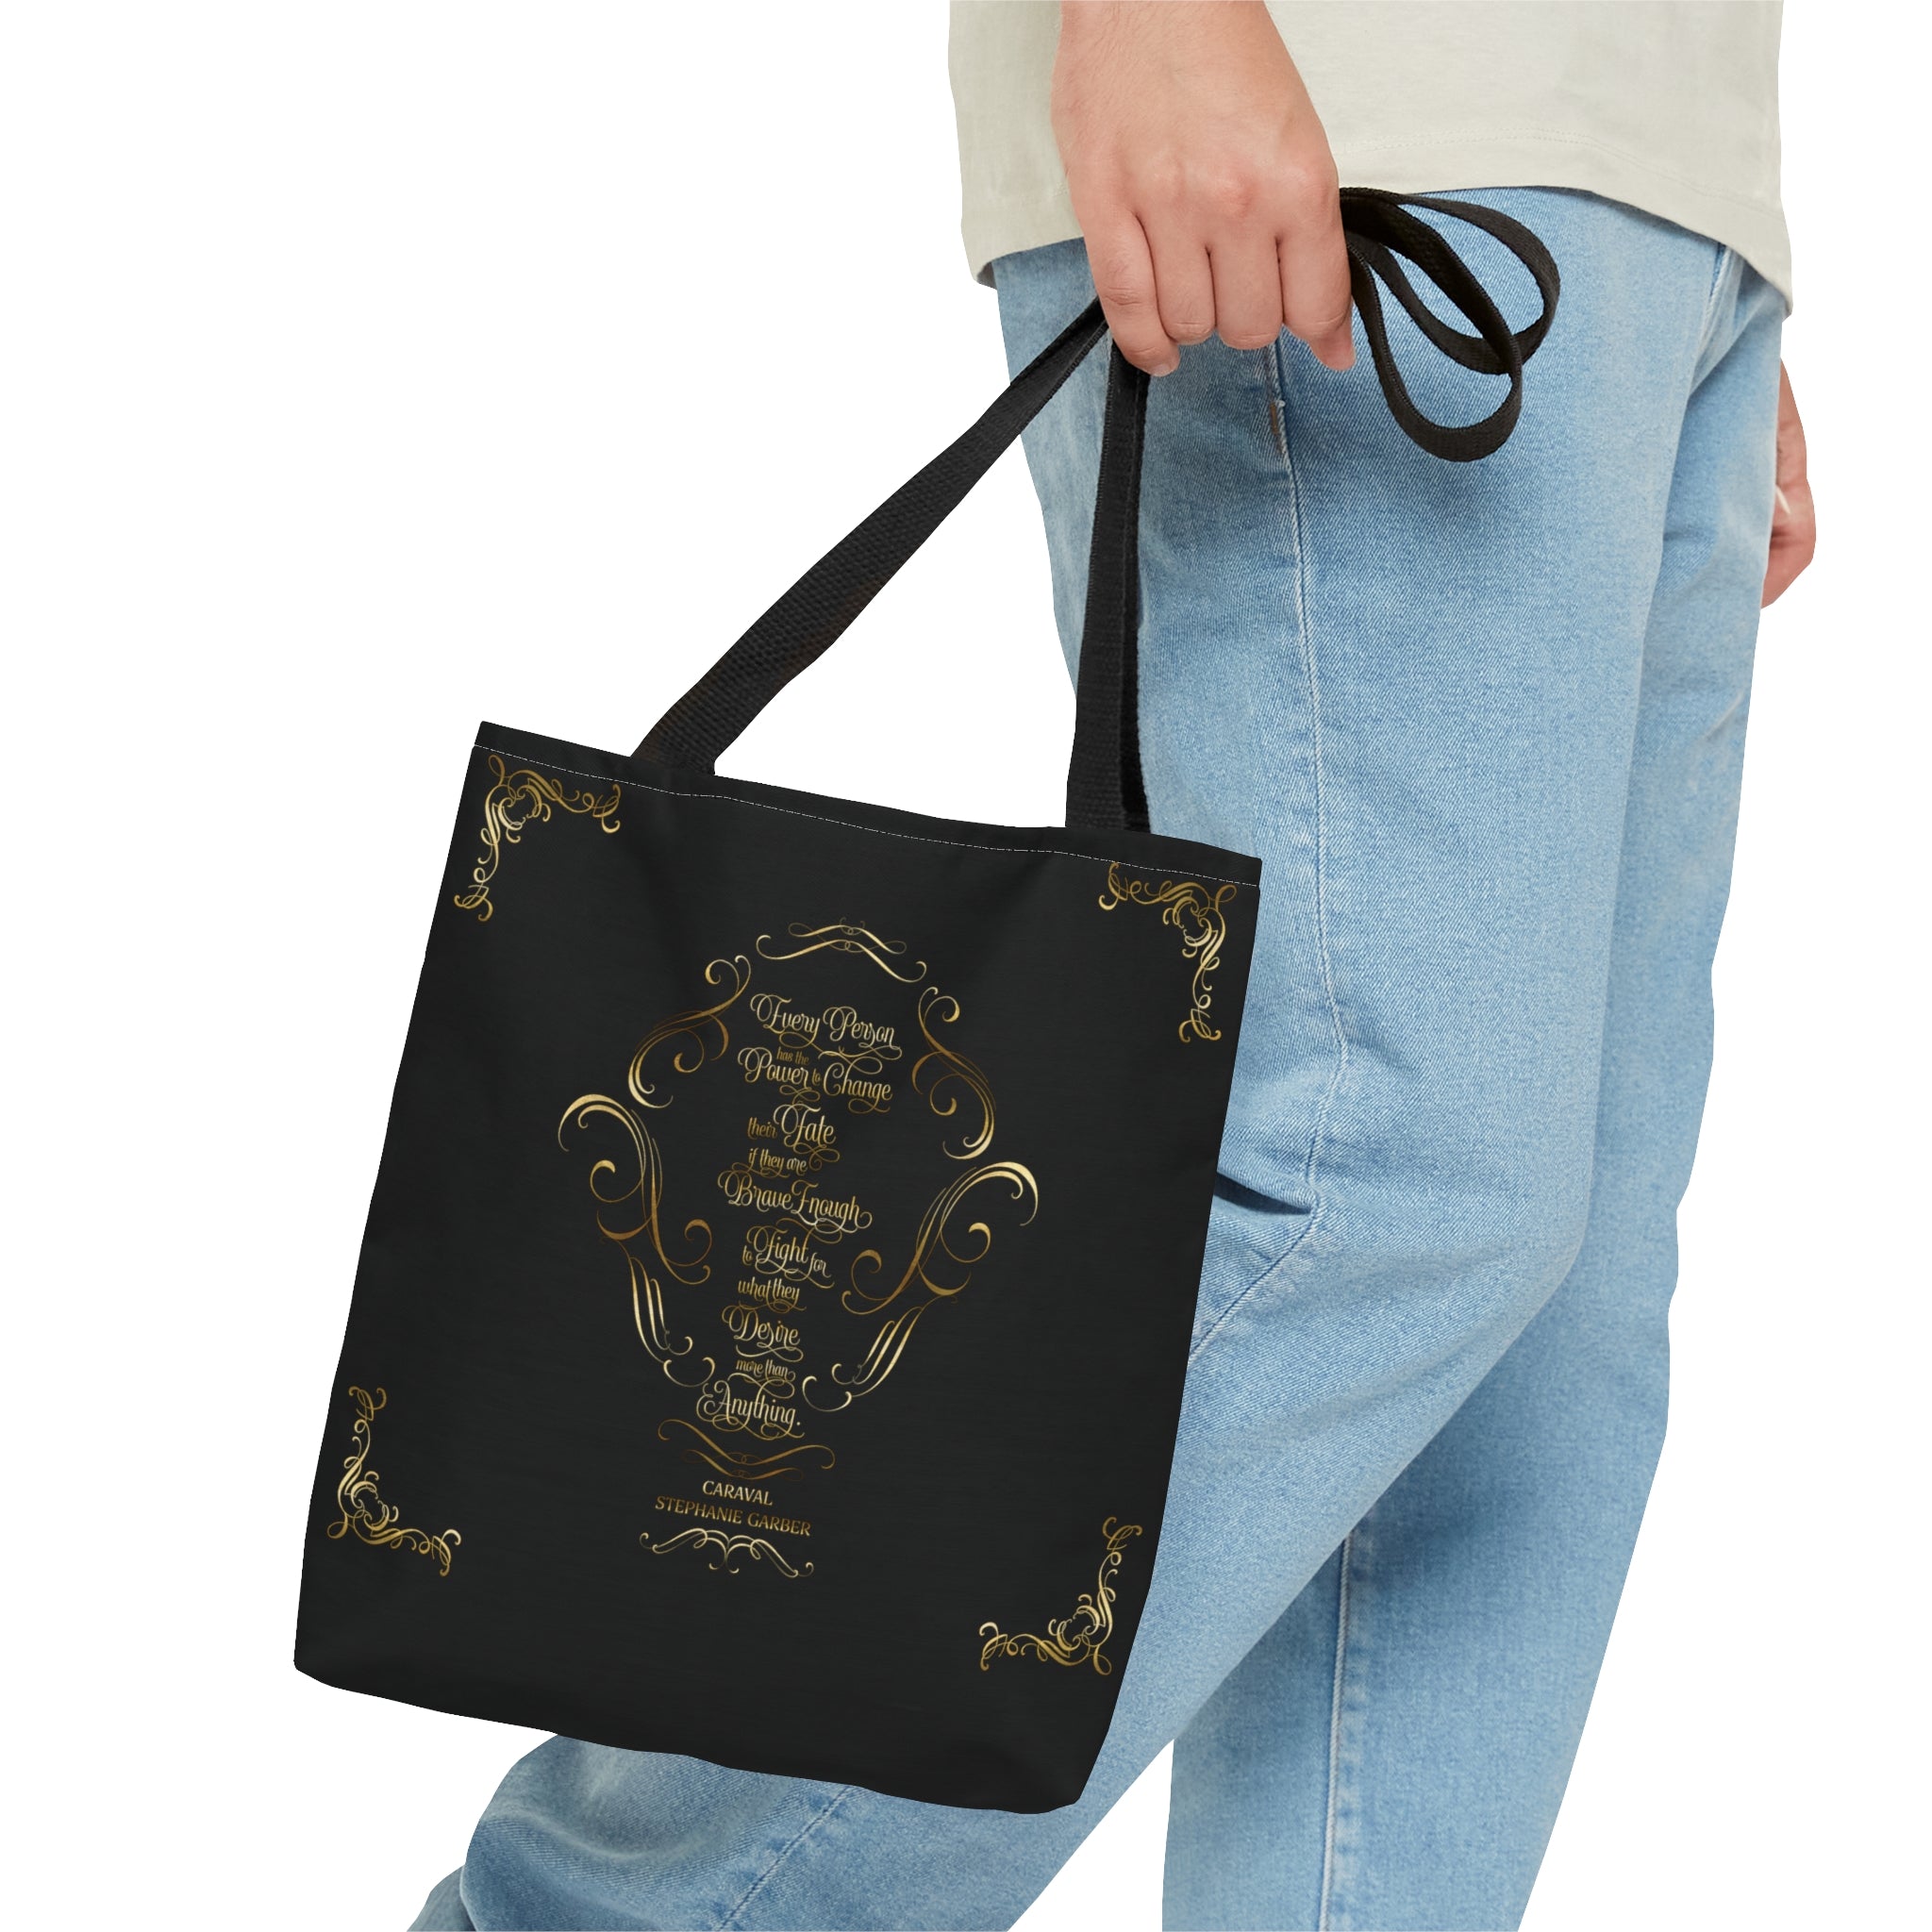 The Power to Change Fate. Caraval Tote Bag